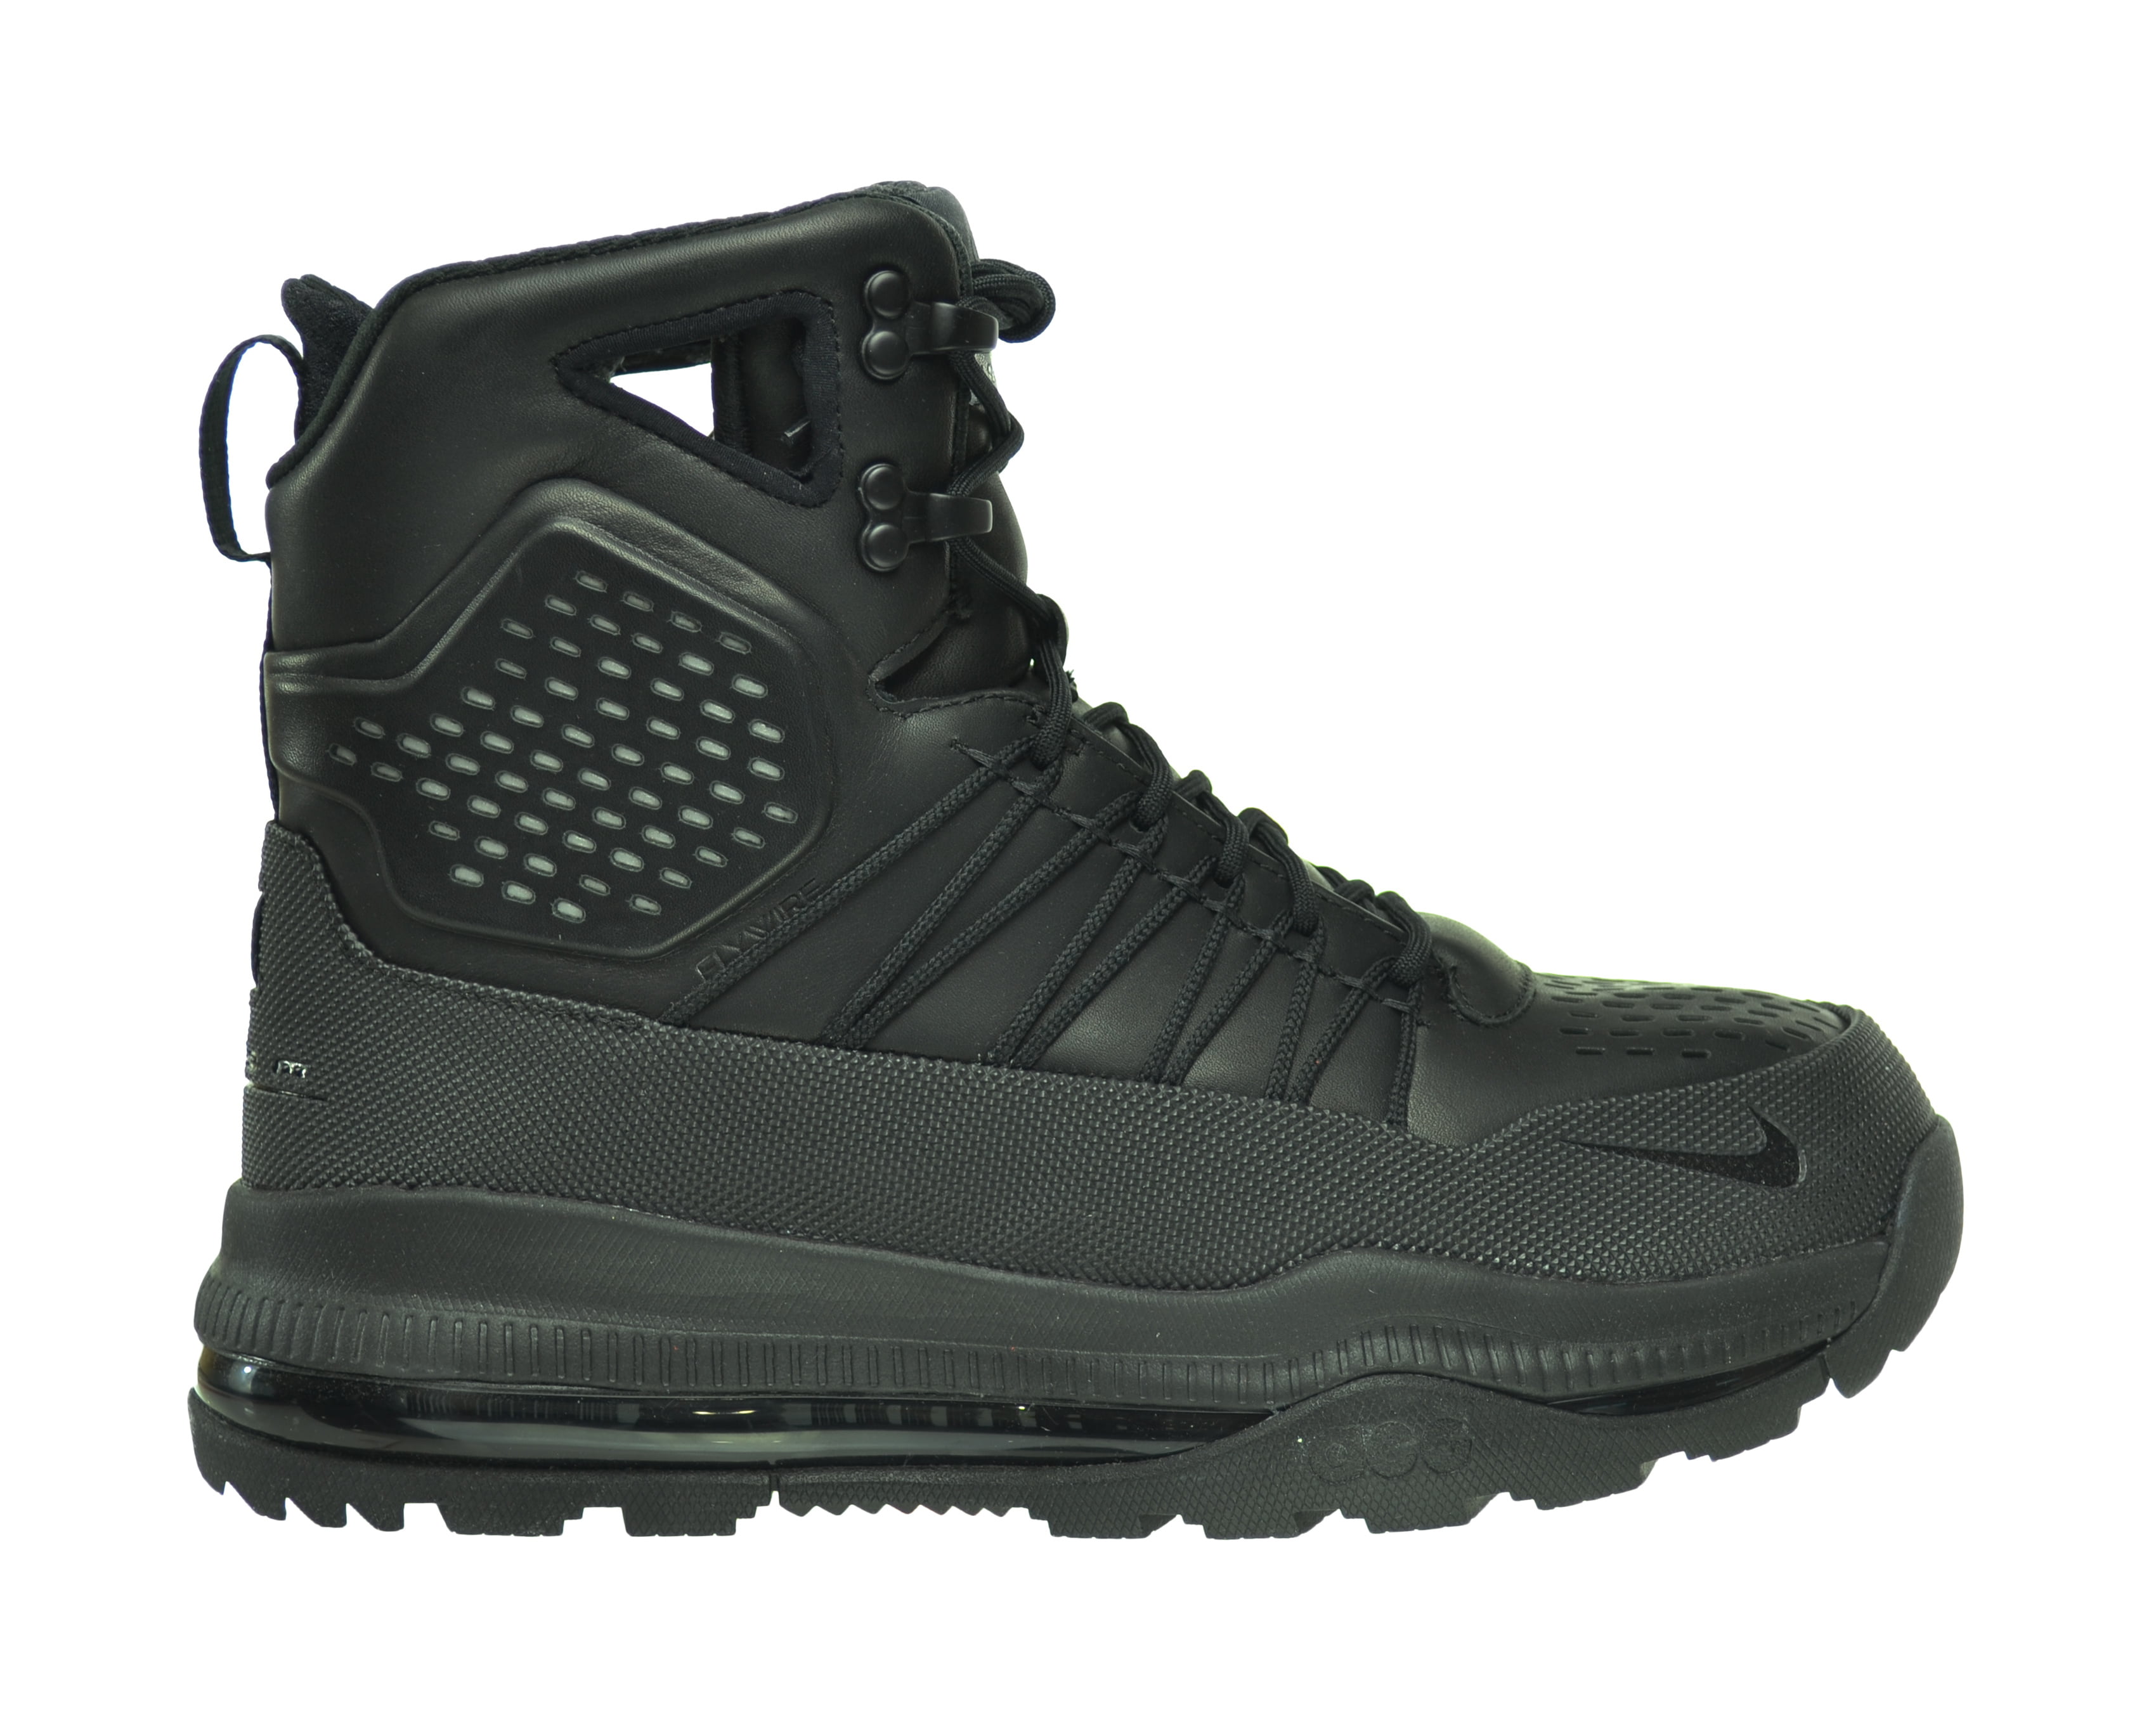 nike superdome boots